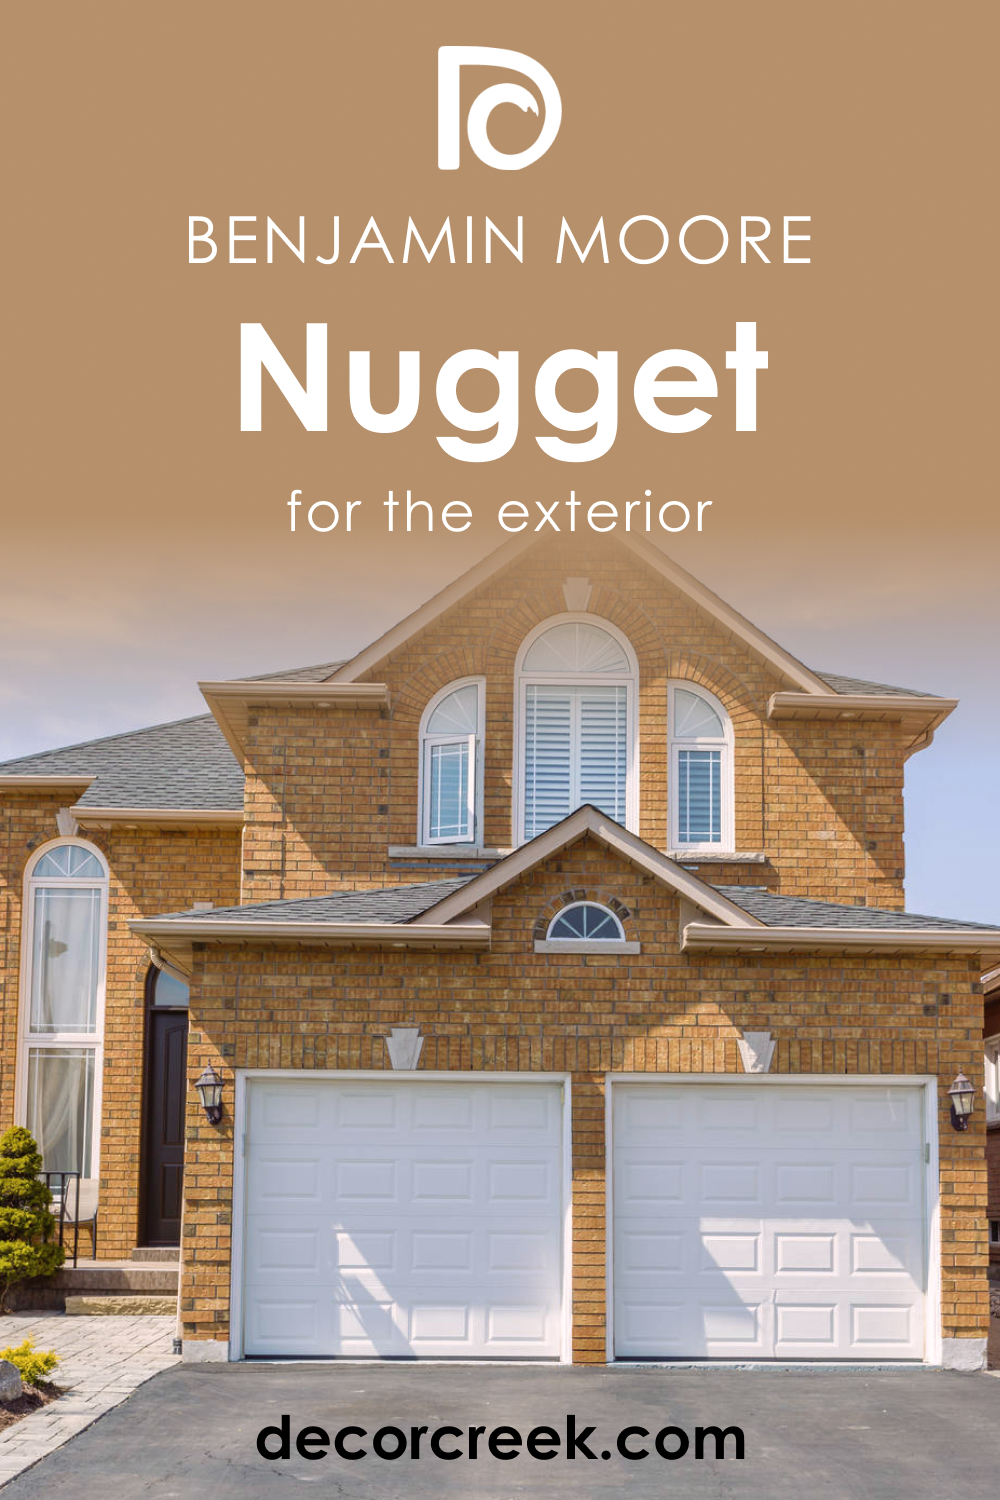 How to Use Nugget AC-9 for an Exterior?